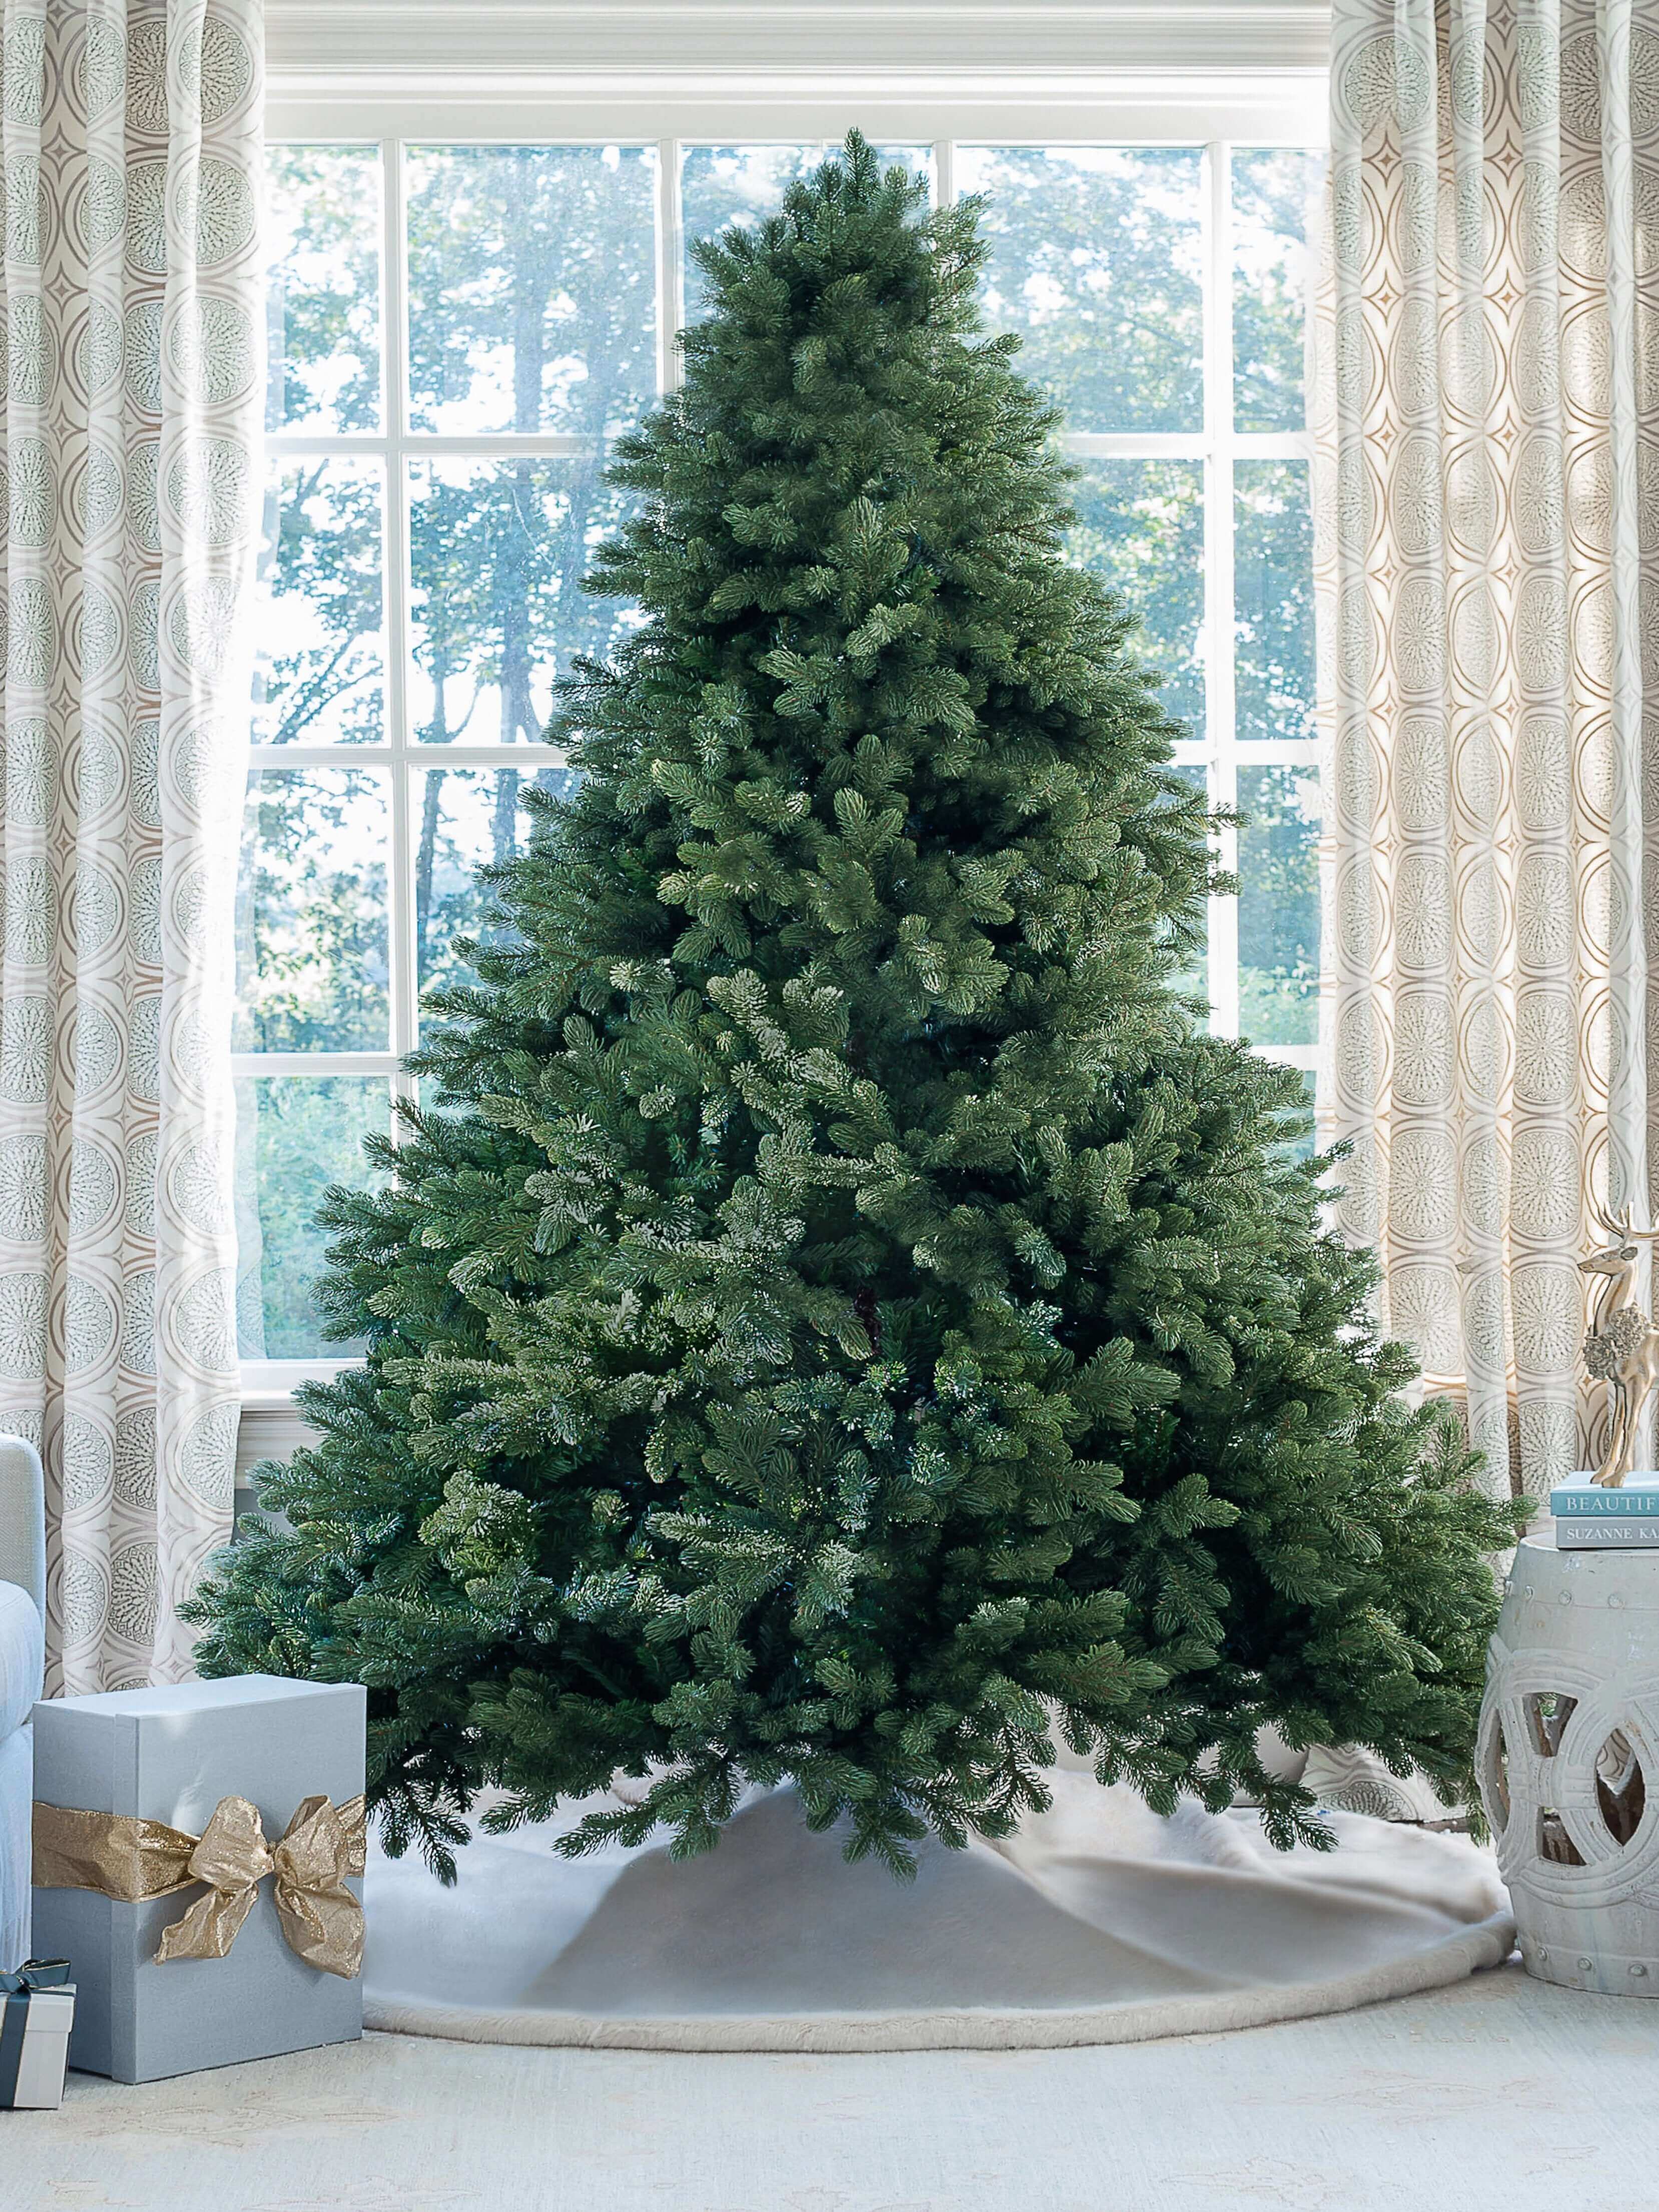 King of Christmas 9' Cypress Spruce Quick-Shape Artificial Christmas Tree with 2050 Warm White & Multi-Color LED Lights